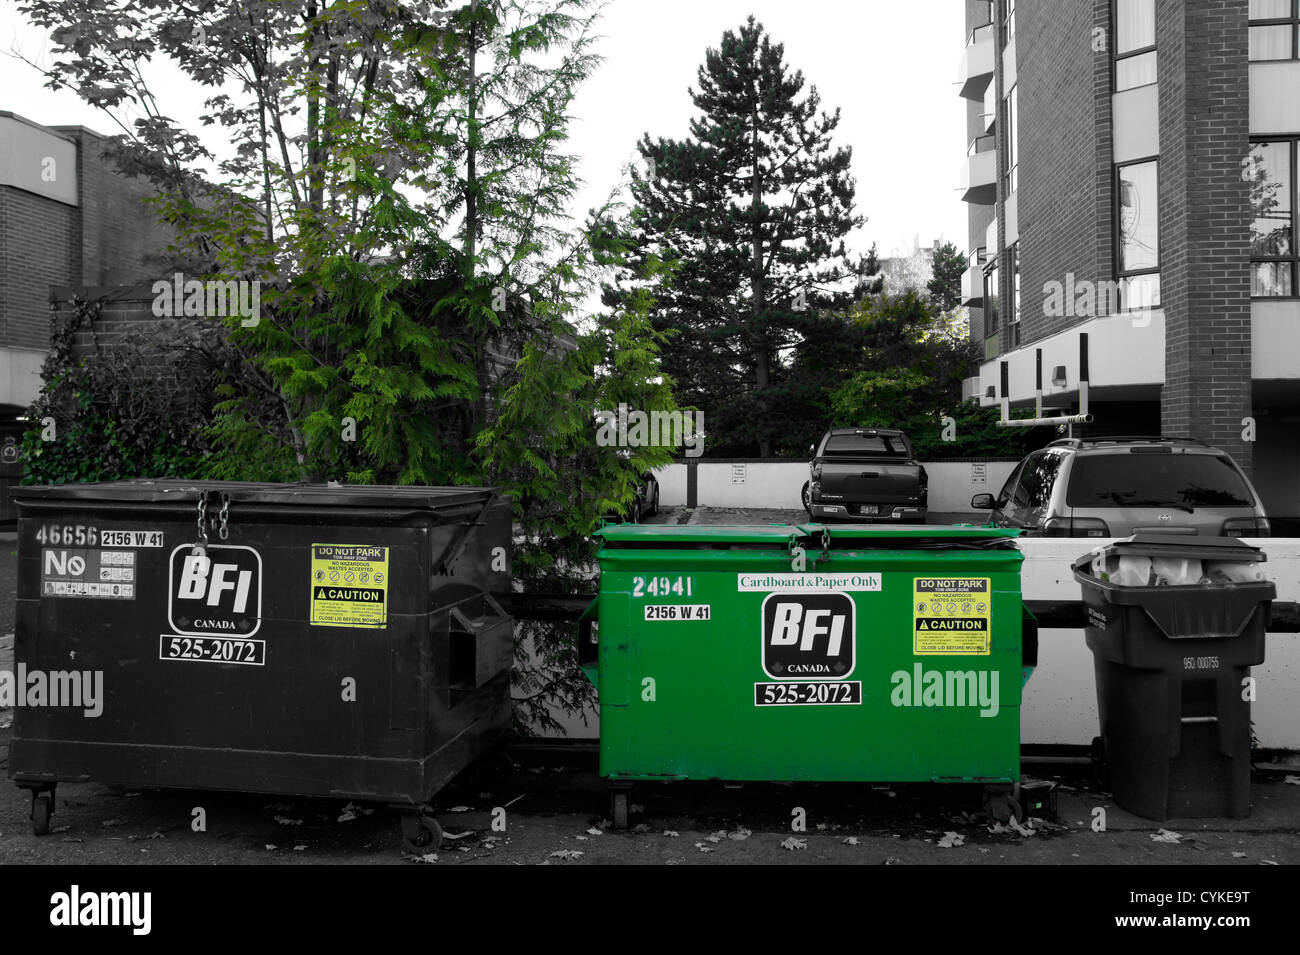 Selective colour green reycycling dumpster in Vancouver, British Columbia, Canada Stock Photo